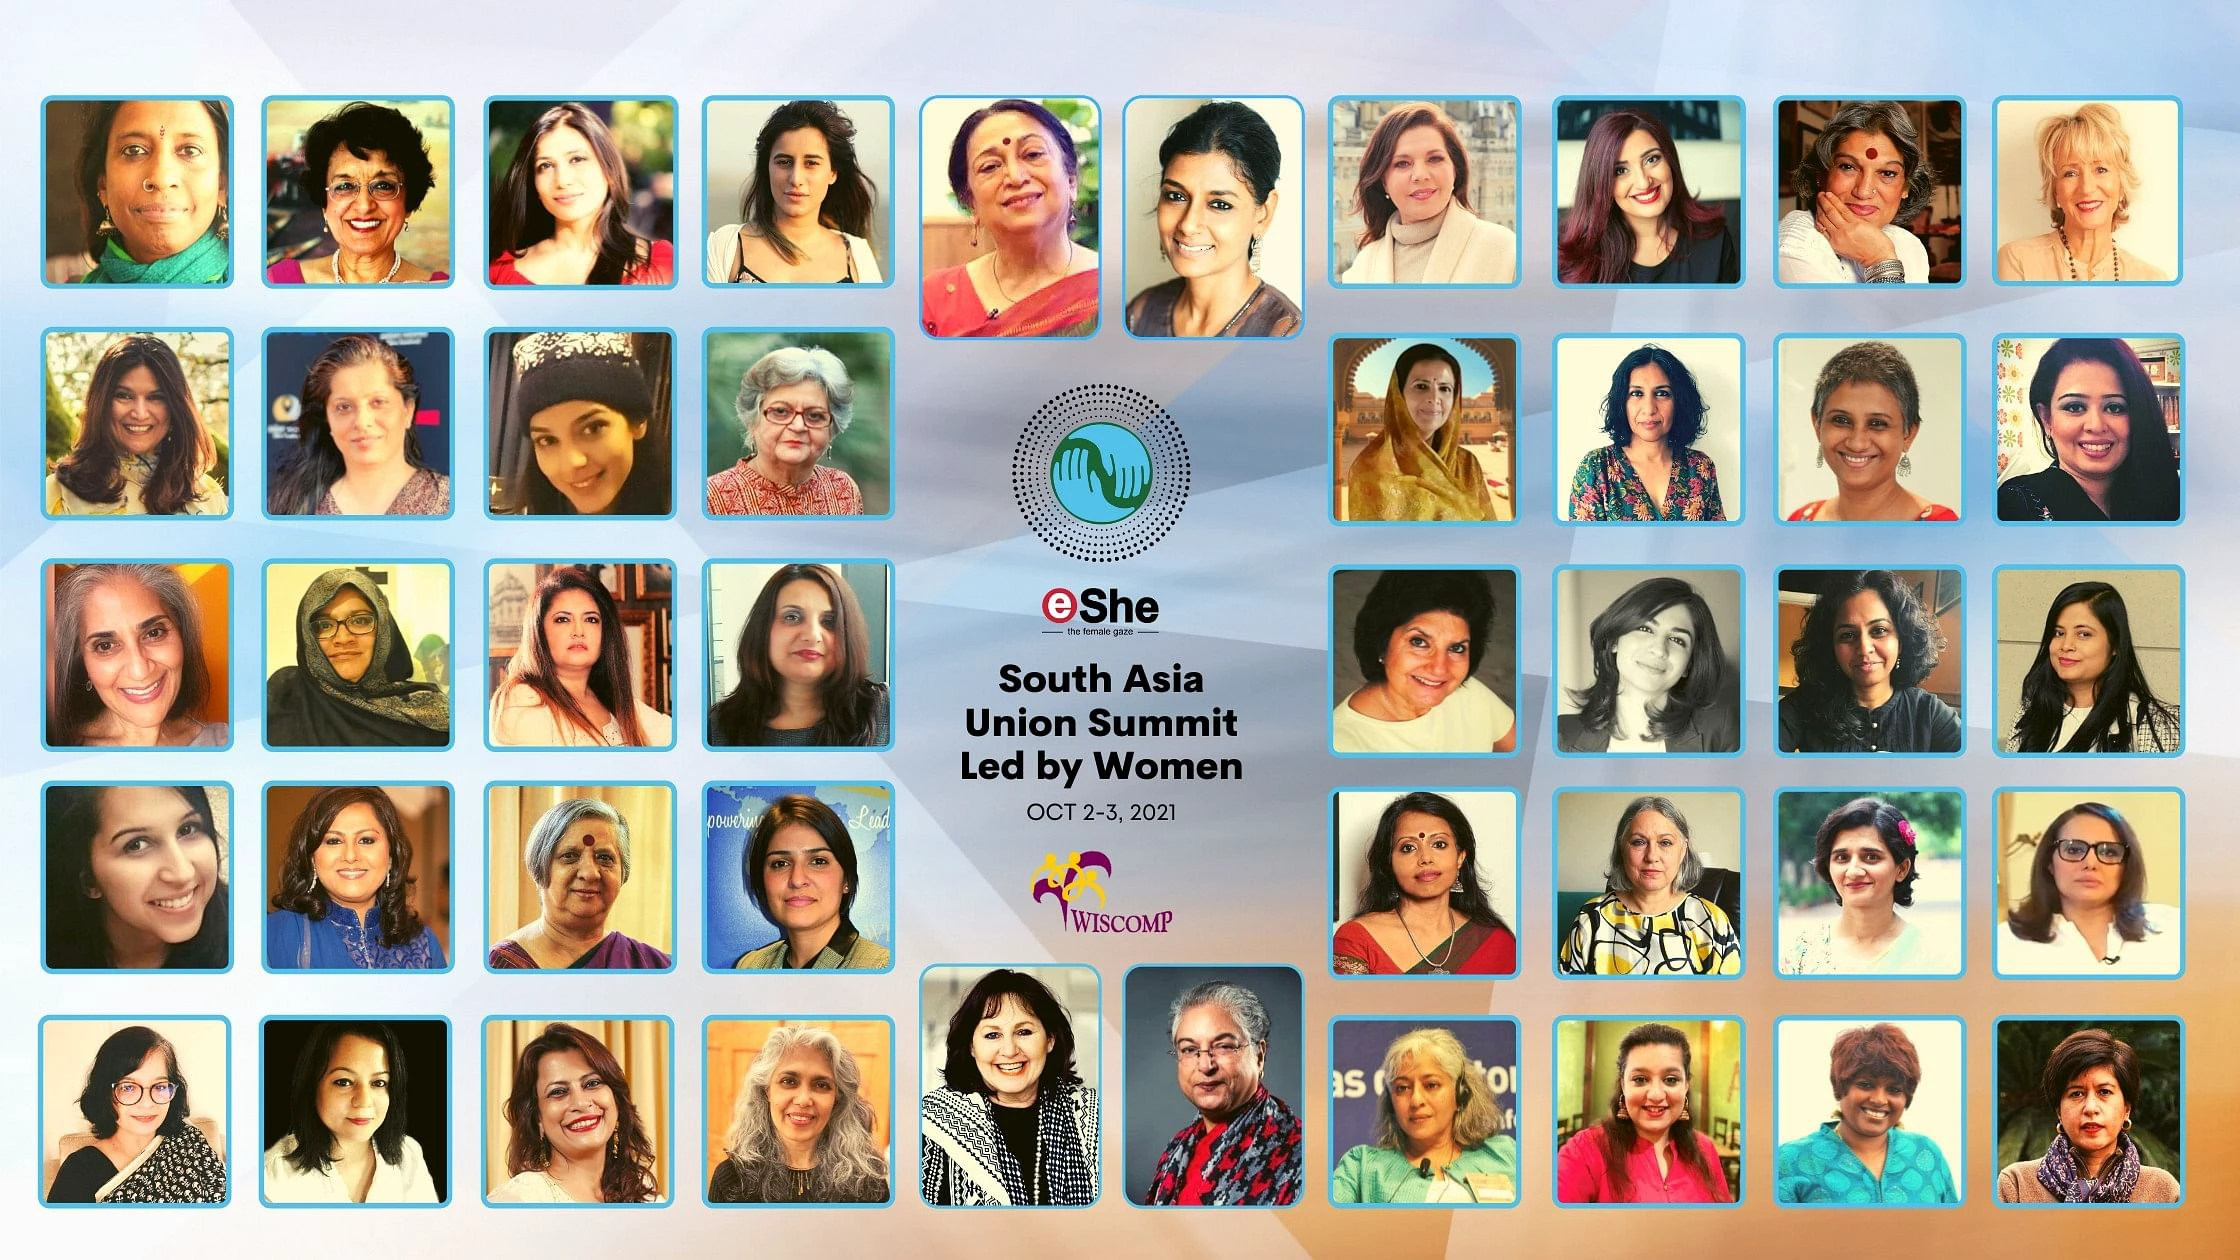 Putting the focus on women's leadership, former journalist launches South Asia Union Summit Led by Women